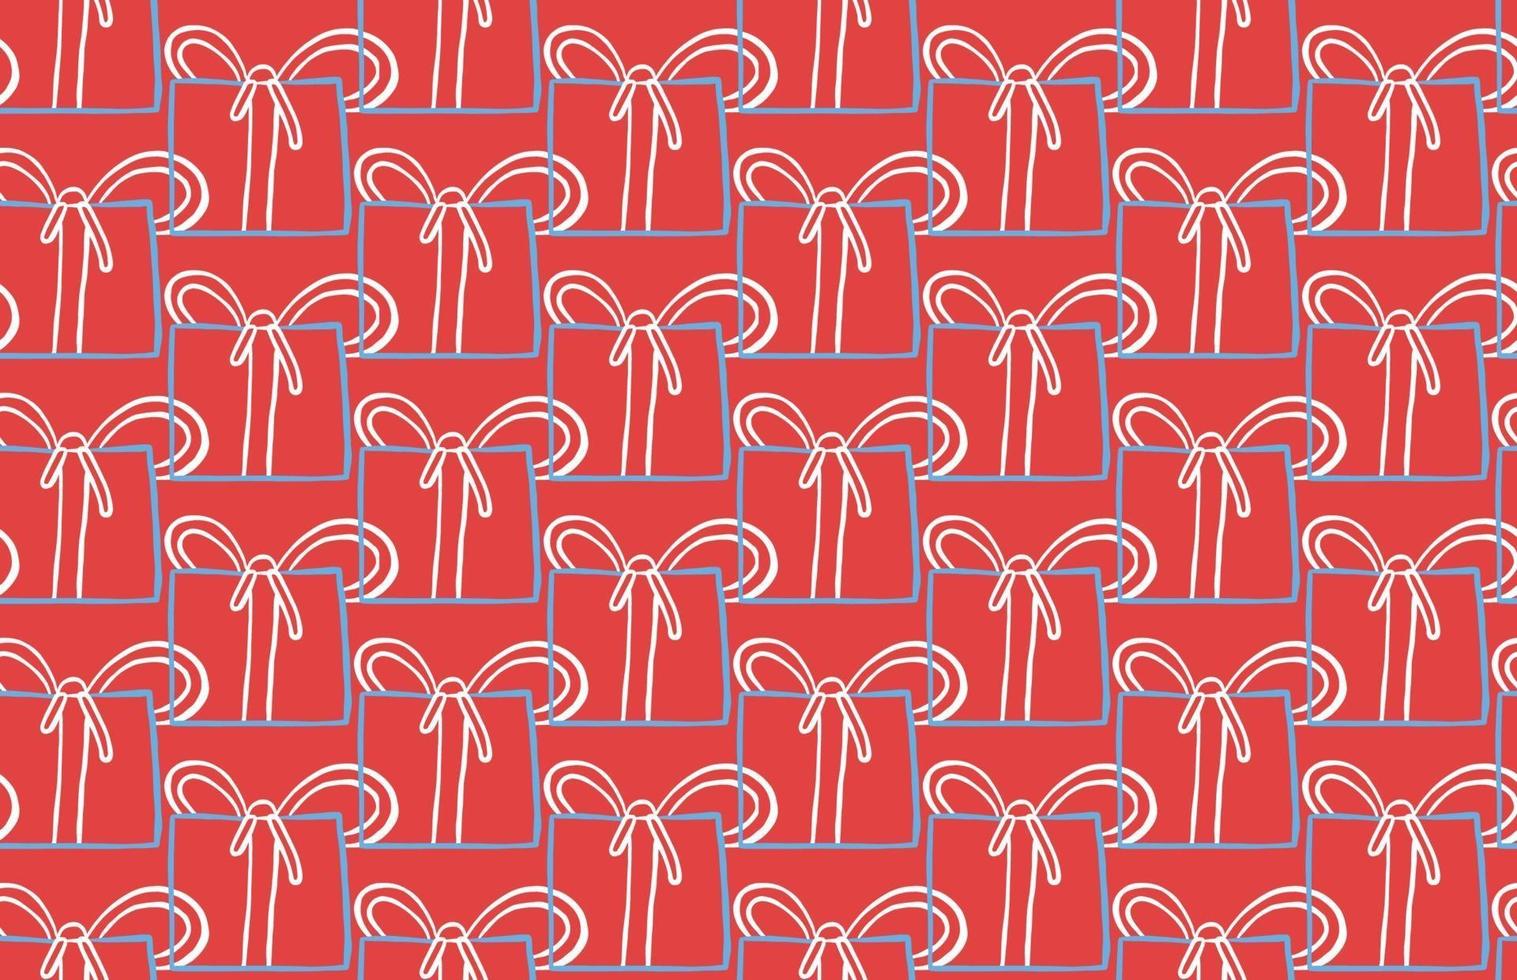 Vector texture background, seamless pattern. Hand drawn, red, white, blue colors.